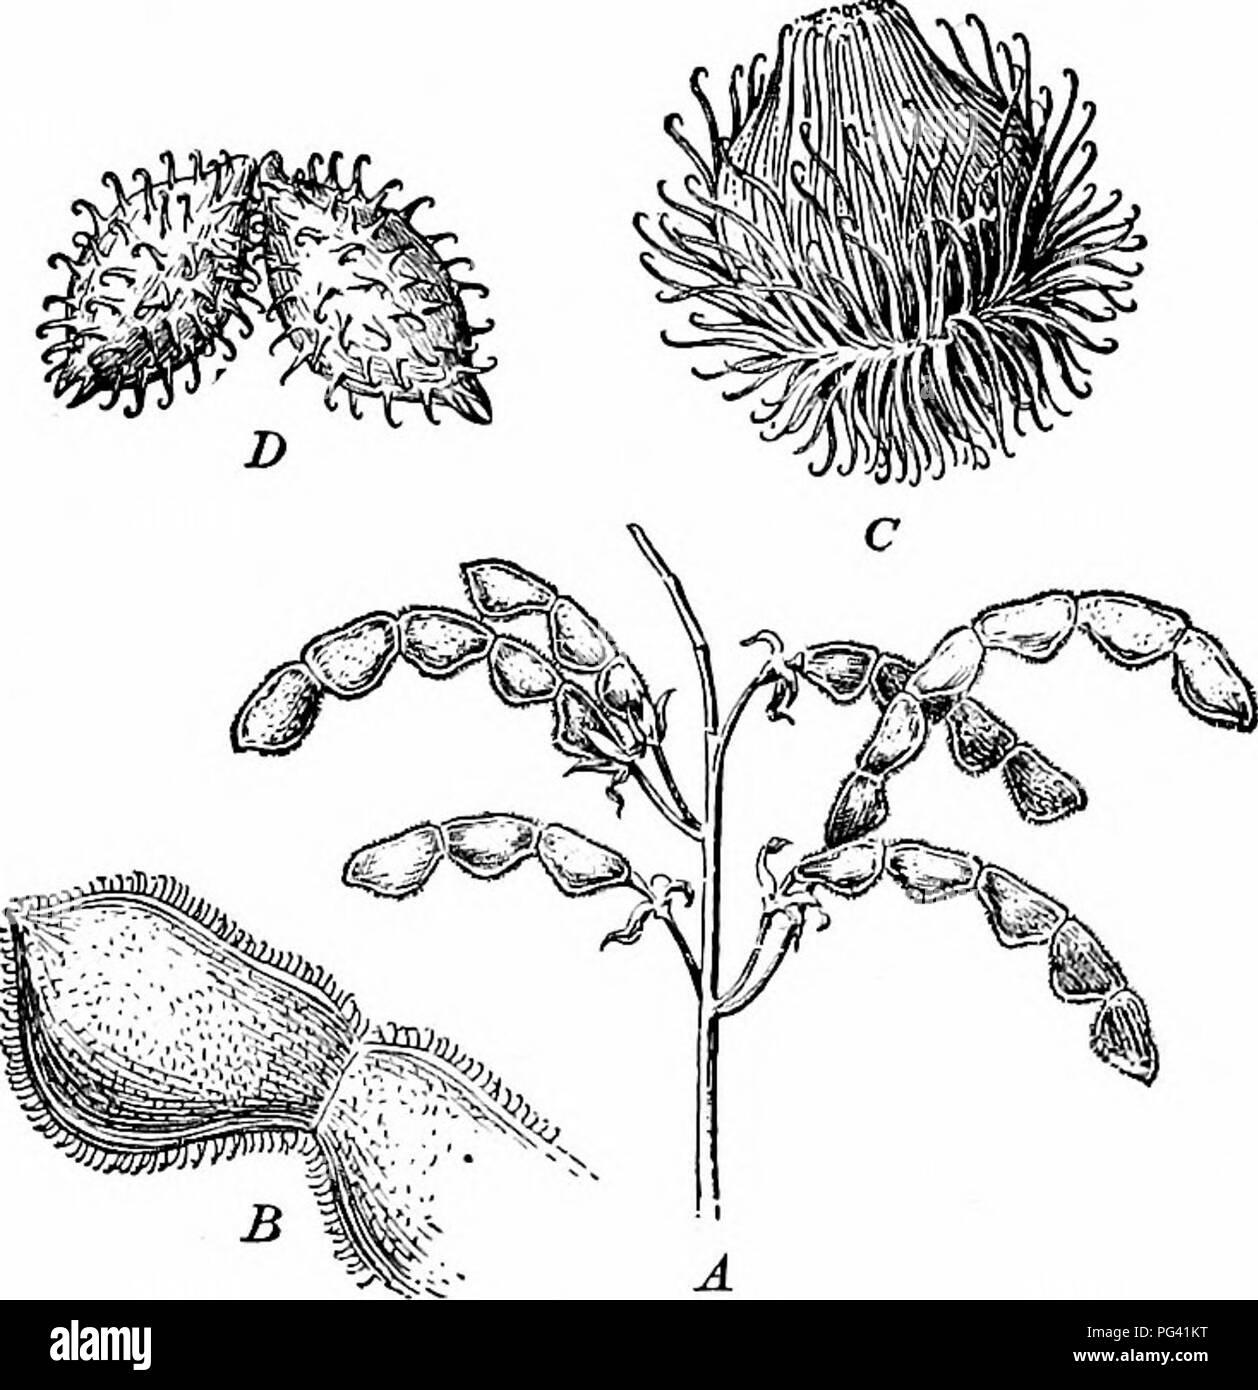 . Essentials of botany. Botany; Botany. 196 ESSENTIALS OF BOTANY sometimes outgrowths from the ovary, sometimes from the calyx, sometimes from an involucre. Their office is to attach the fruit to the hair or fur of passing animals. Often, as in sticktights (Fig. 147), the hooks are com- paratively weak, but in other eases, as in the cockle- bur (Fig. 147), and still more in the Martynia, the fruit of. Fig. 147. Burs. A, sticktights; B, sticktights, two segments (magnified); C, burdock; B, cockleburs. which in the green condition is much used for pickles, the hooks are exceedingly strong. Cockl Stock Photo